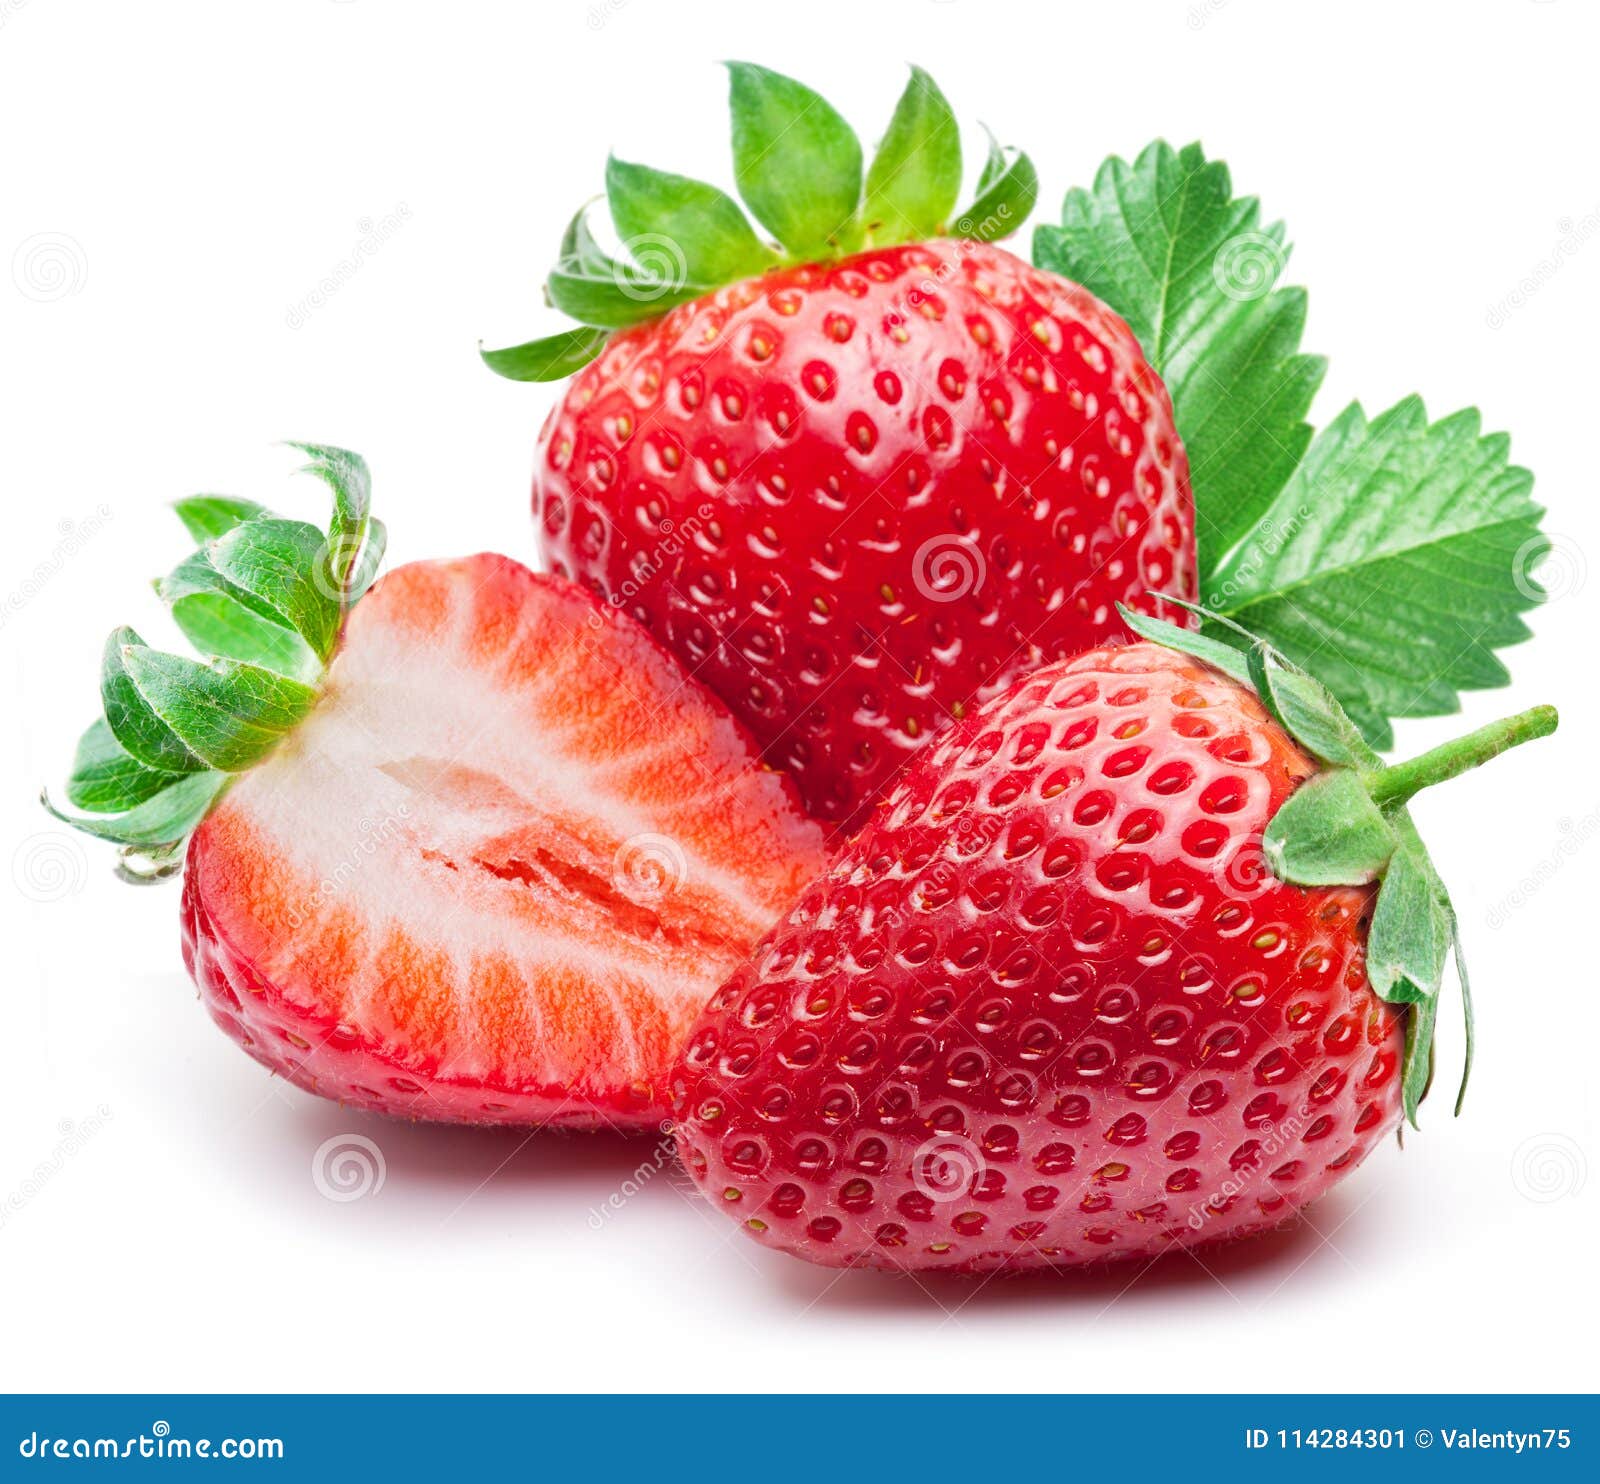 three strawberries with strawberry leaf on white background.